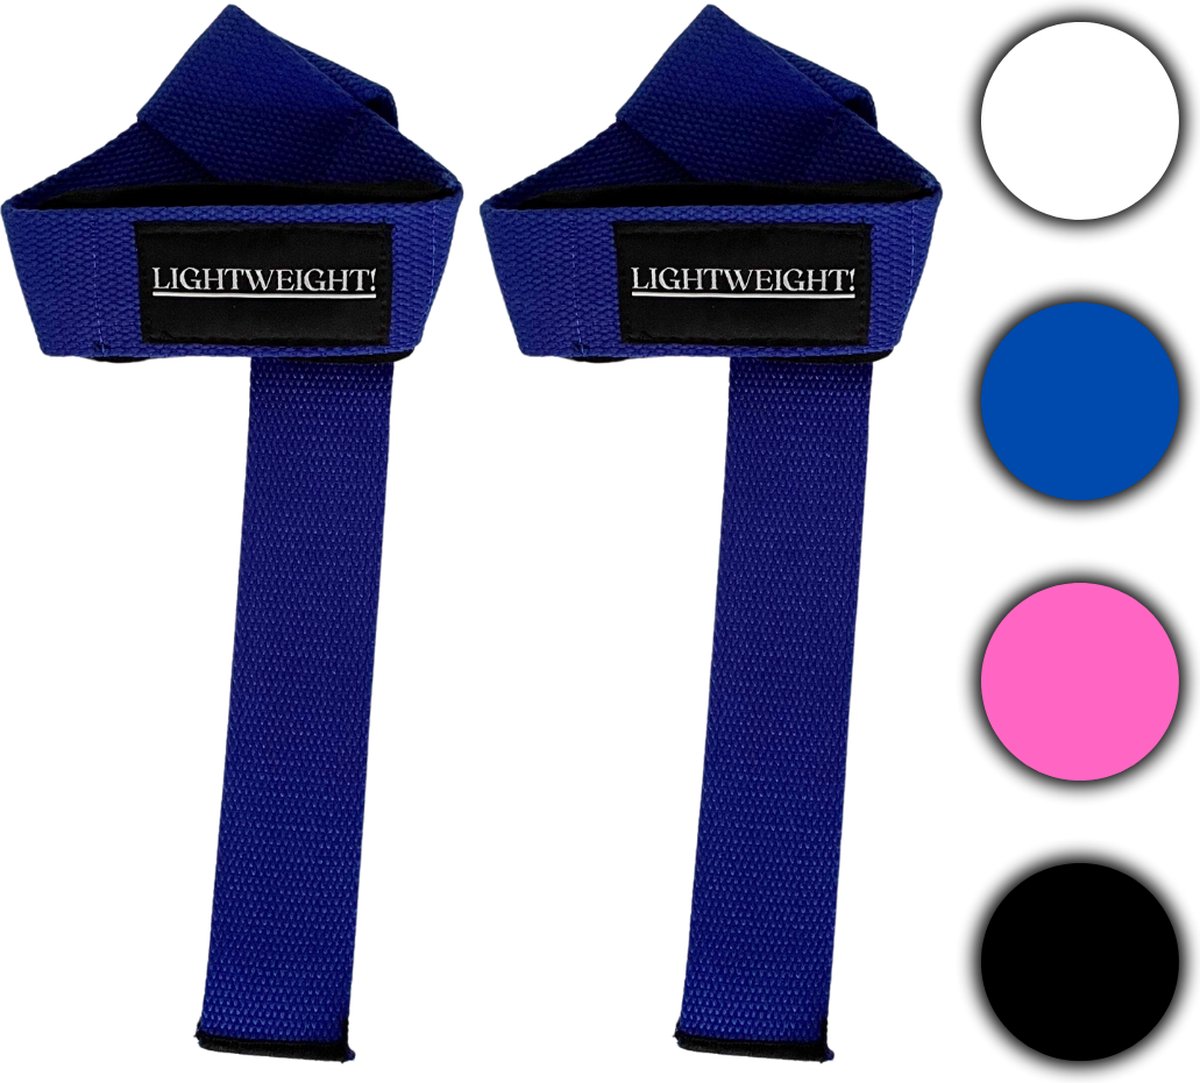 LIGHTWEIGHT! Lifting Straps - Wrist Straps - Deadlift Straps - Blauw - Krachttraining Accessoires - Lifting Grips - Powerlifting - Bodybuilding - Gym Straps - Fitness - Set - Incl Padding